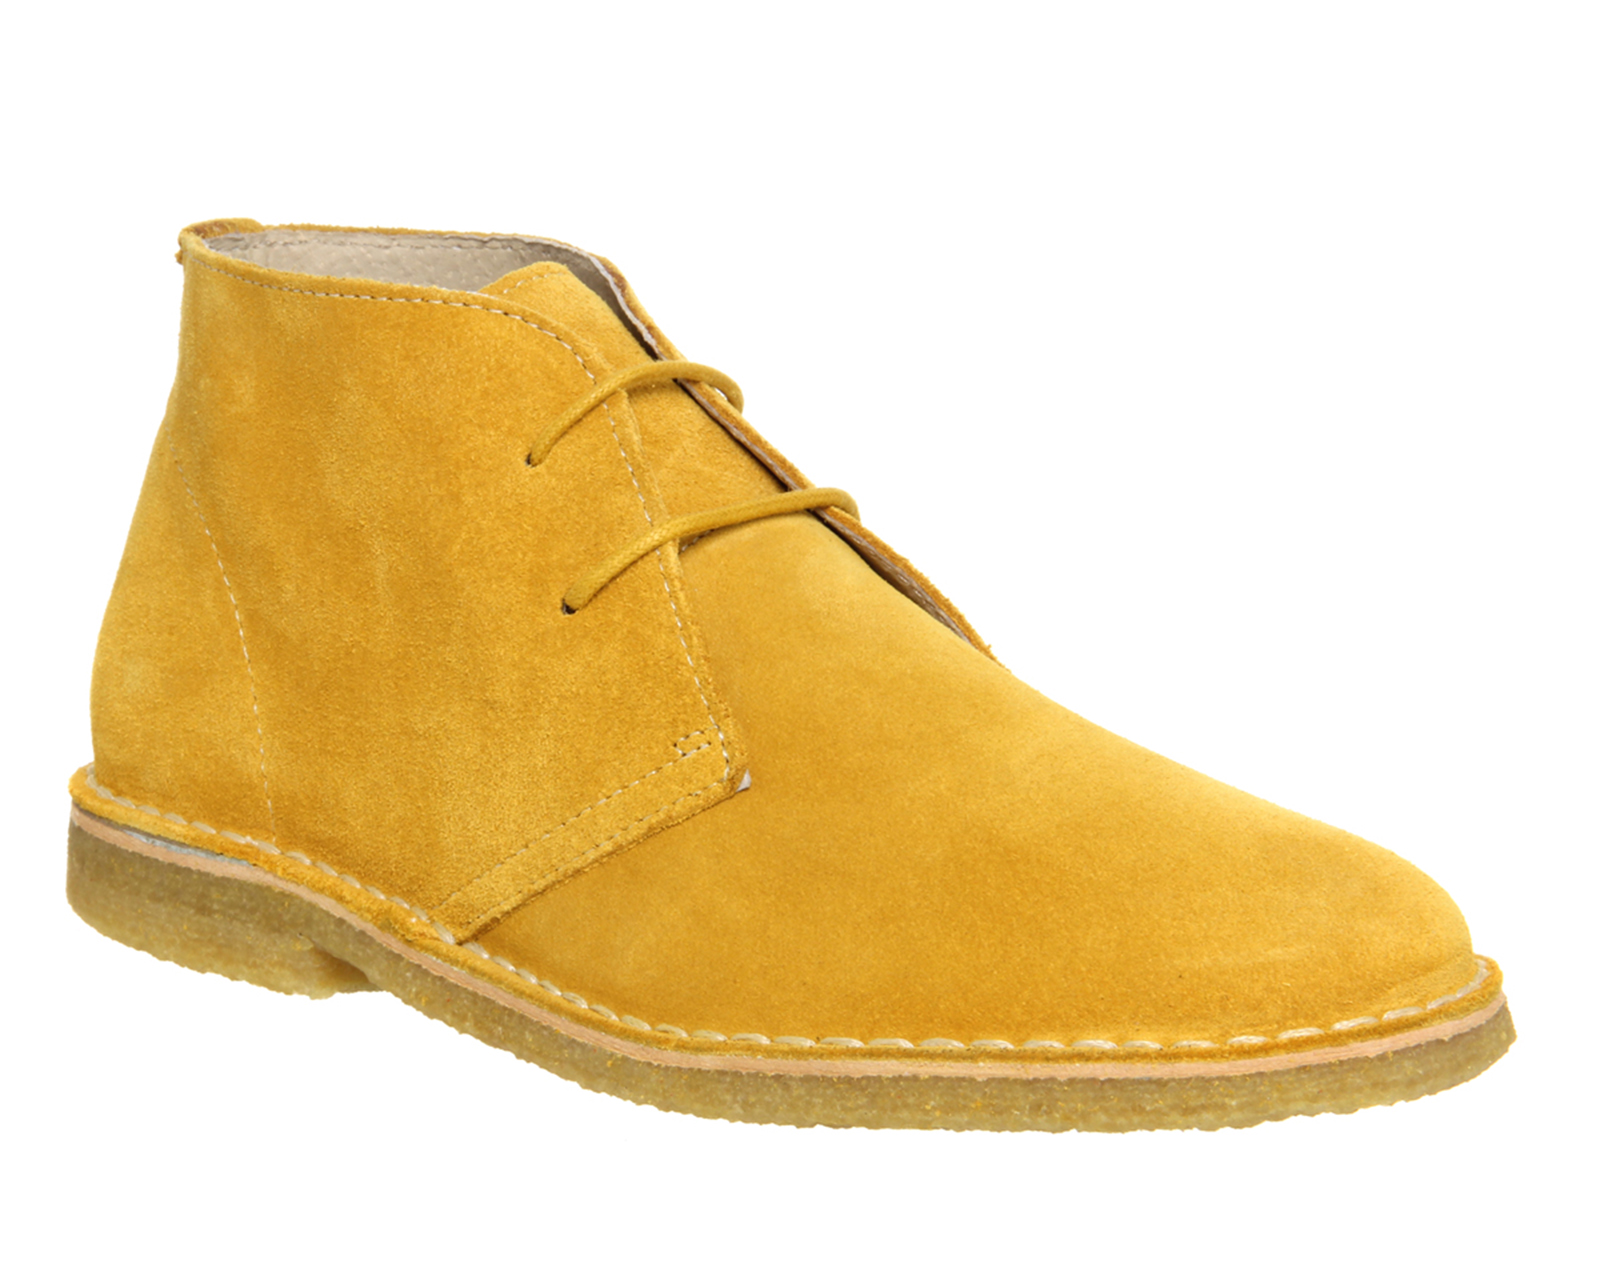 mustard yellow suede boots